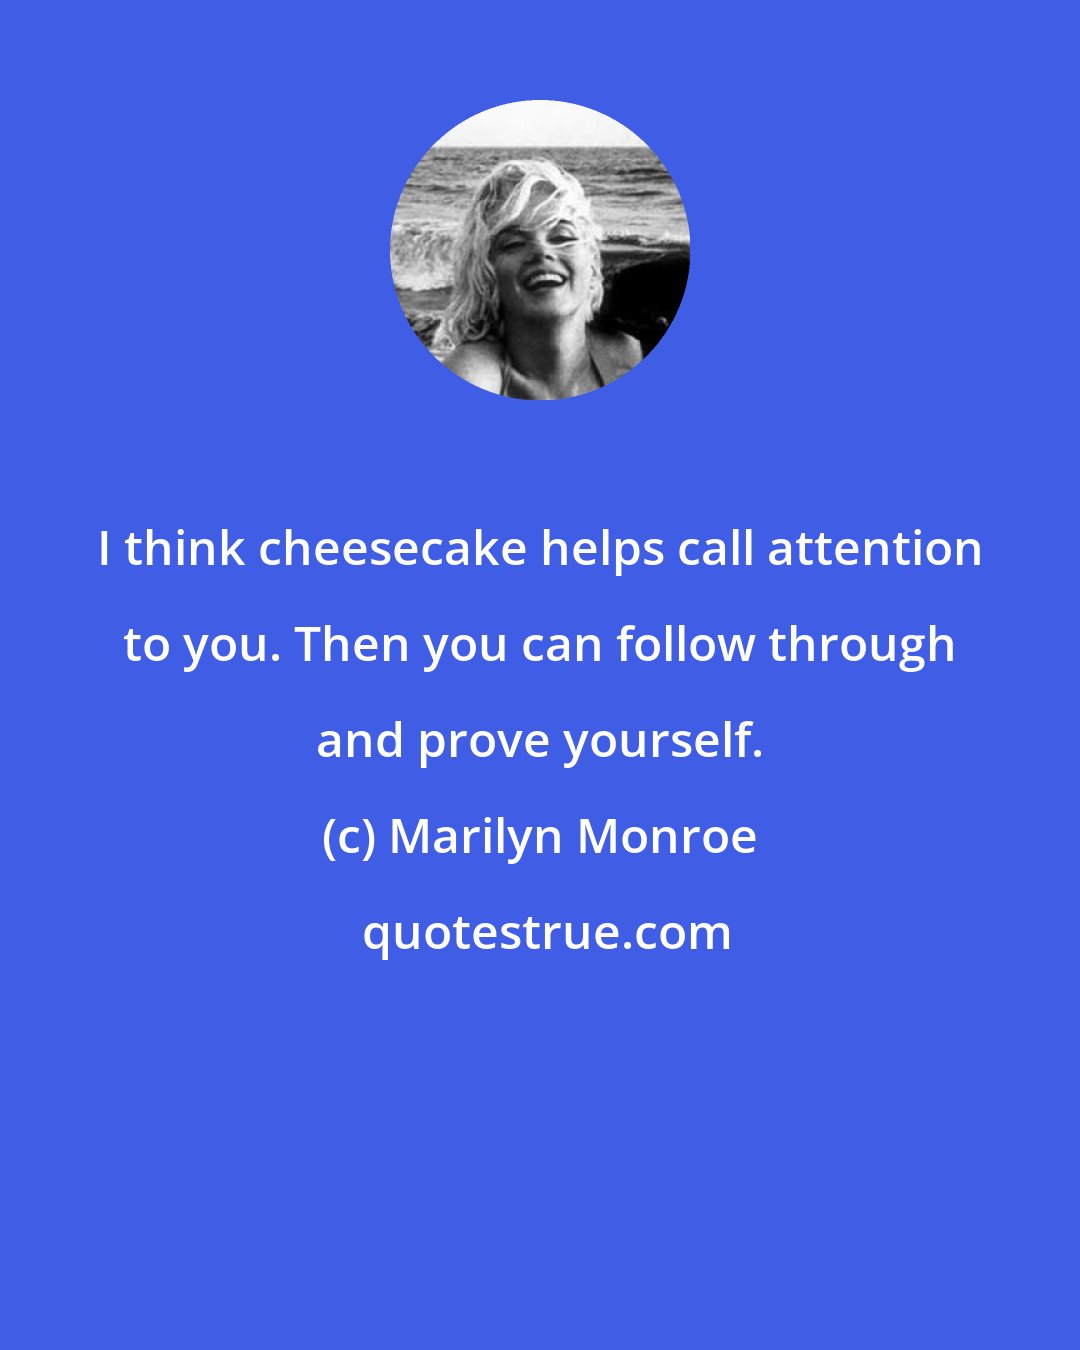 Marilyn Monroe: I think cheesecake helps call attention to you. Then you can follow through and prove yourself.